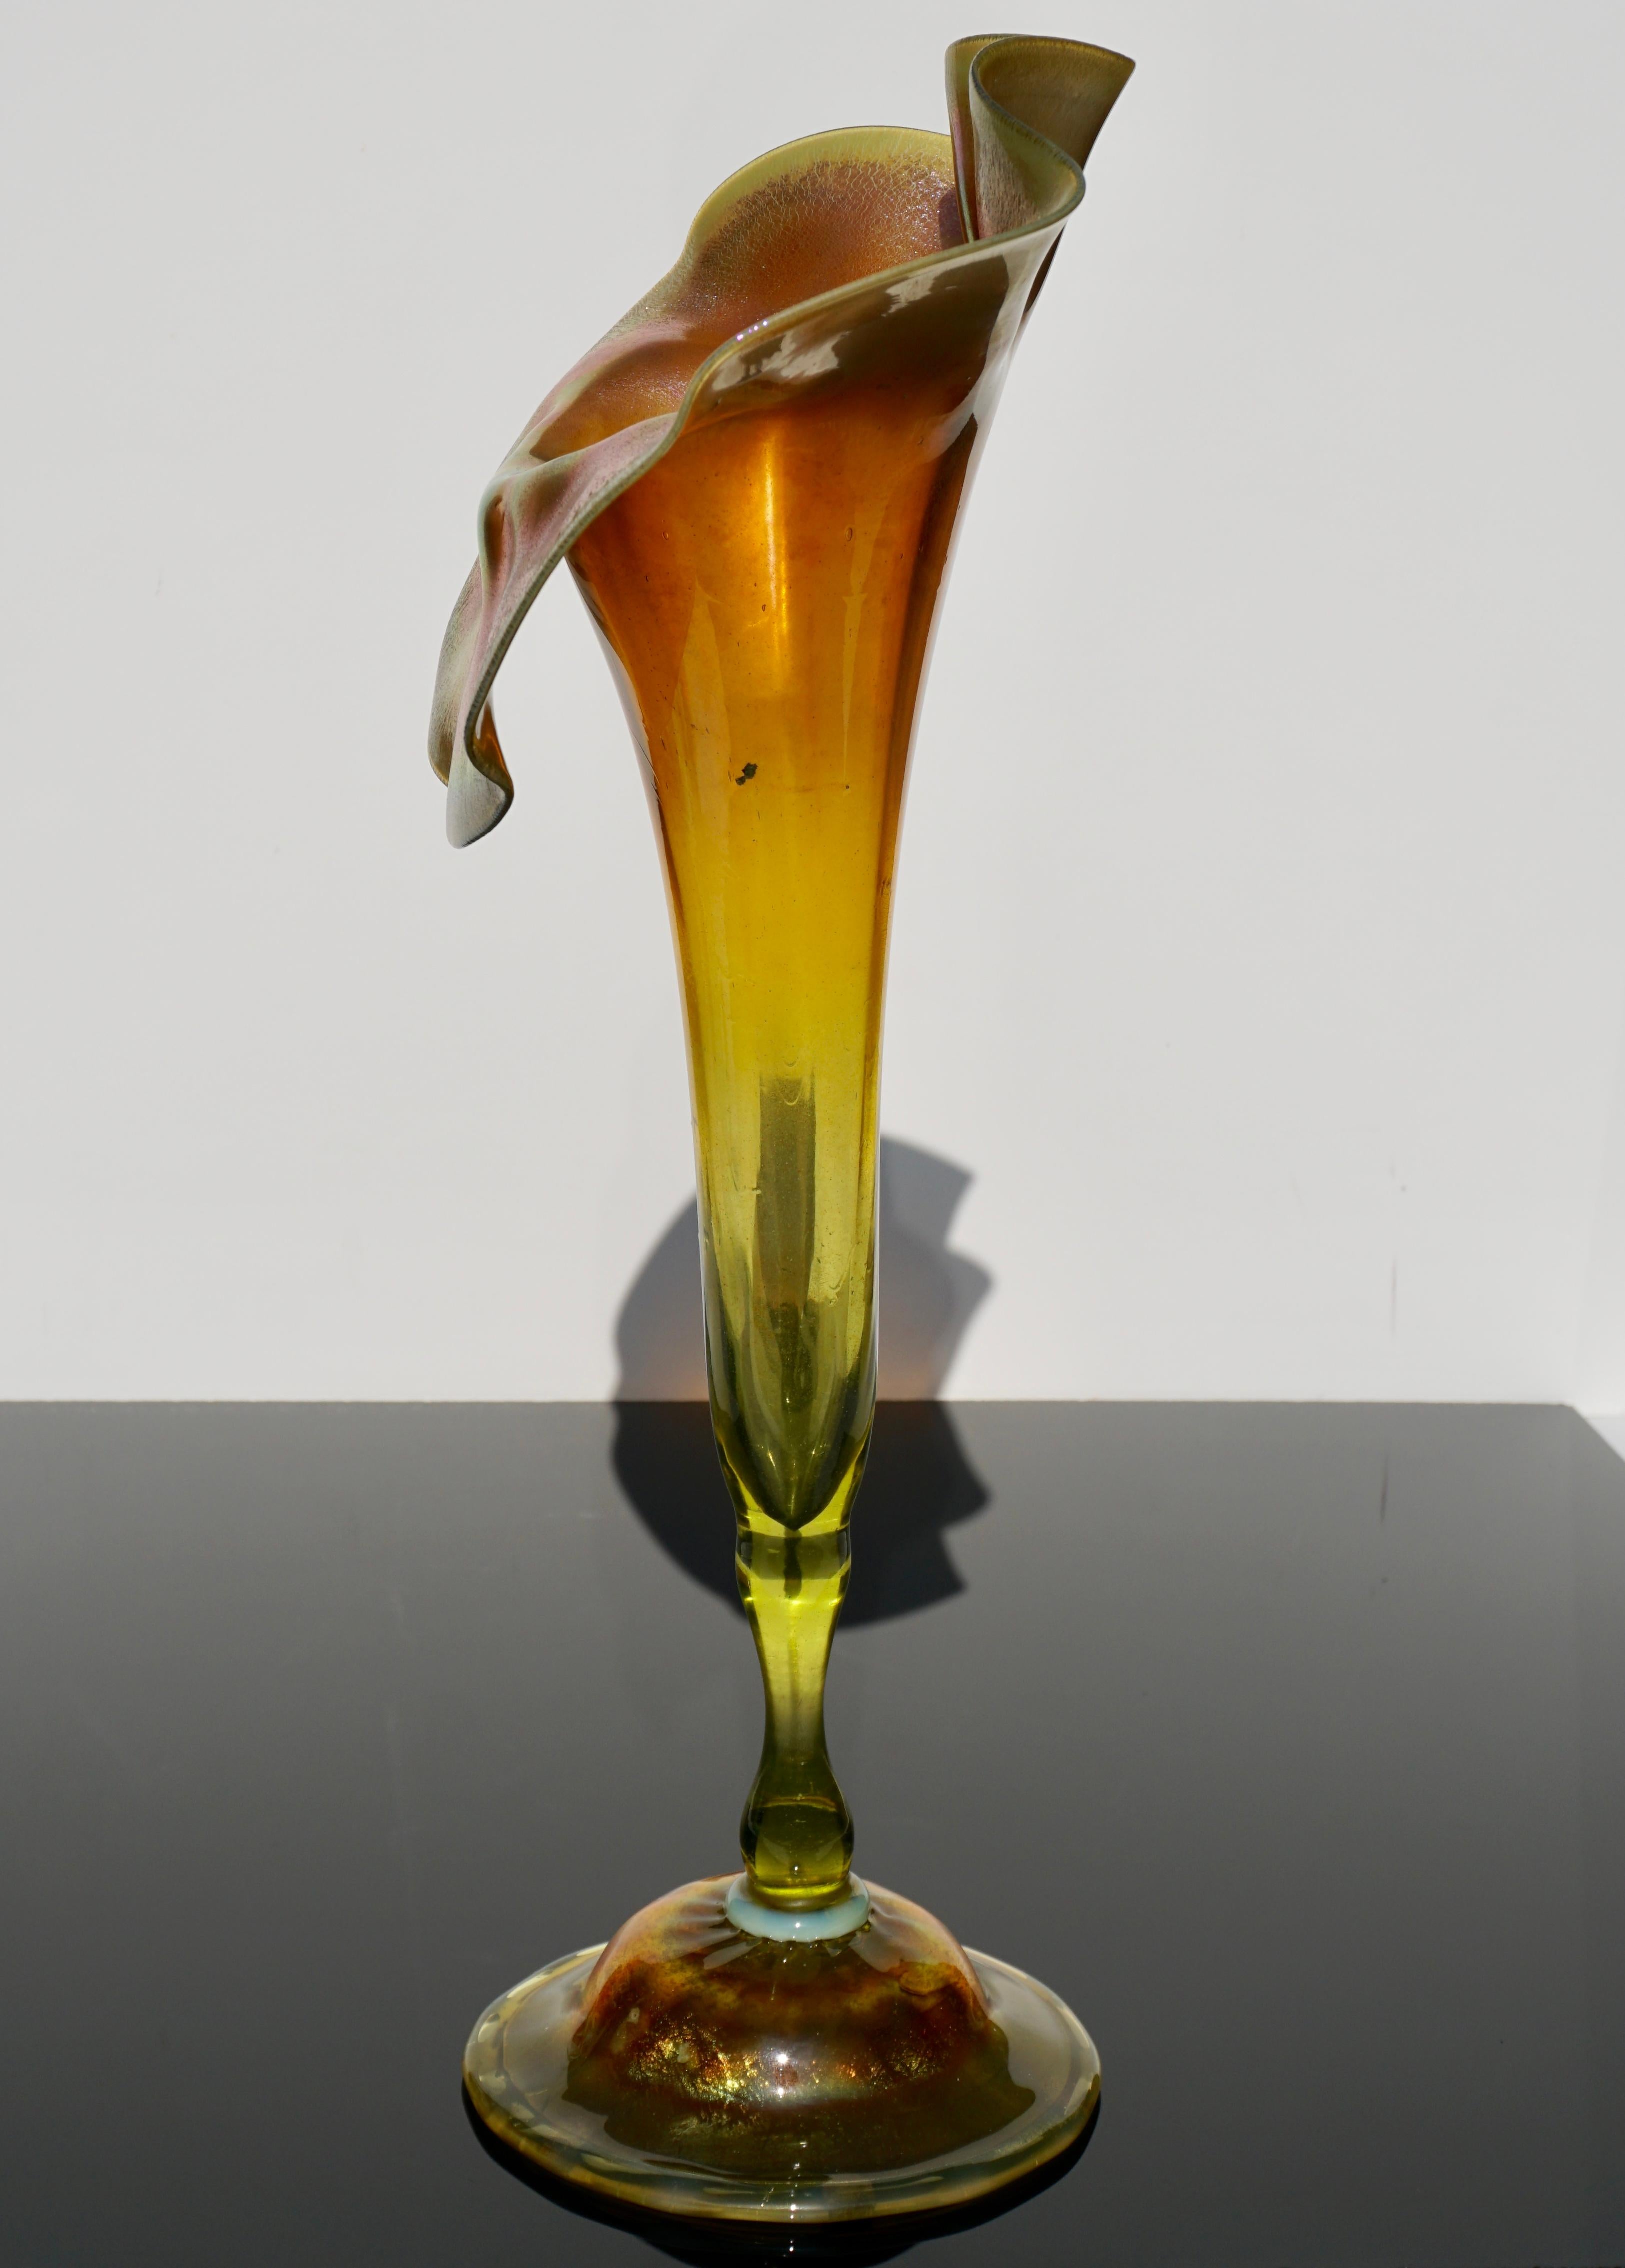 This tall and rare Tiffany Studios vase has an inverted saucer foot with opalescent wafer transition stem to foot. The transparent green glass stem leads to the bowl which fades from green transparent to gold iridescent. The face of the jack has